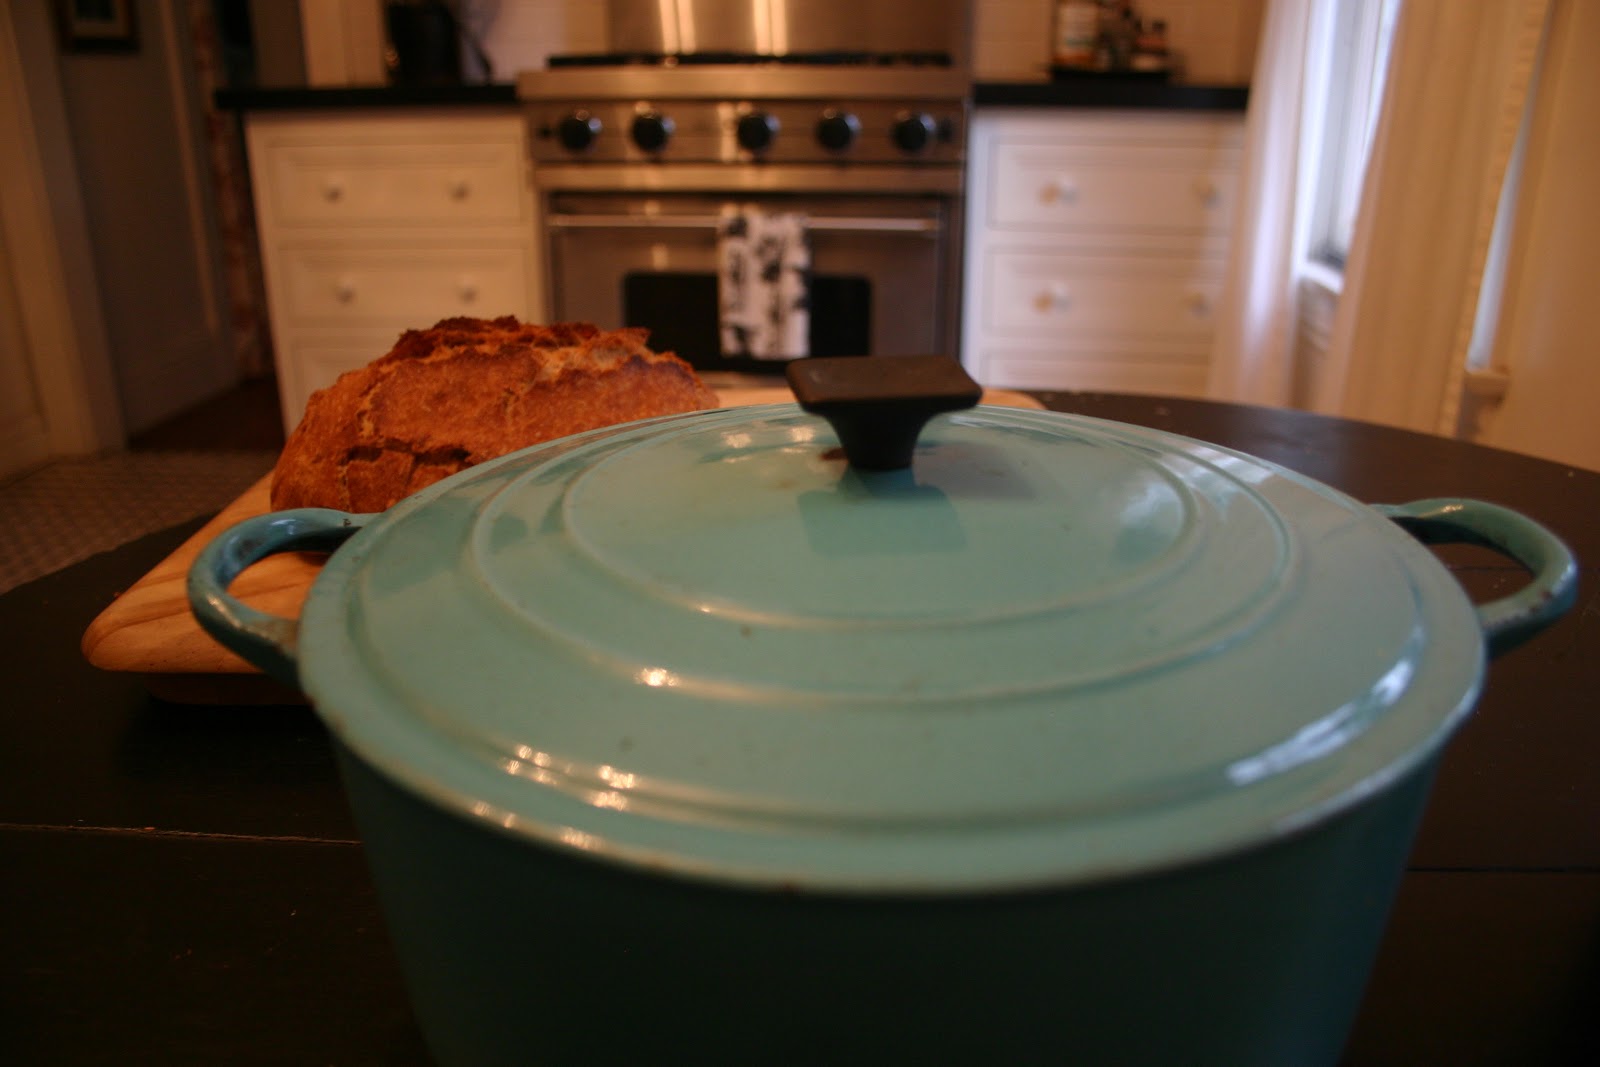 how to clean le creuset cookware - The Gardener's Cottage